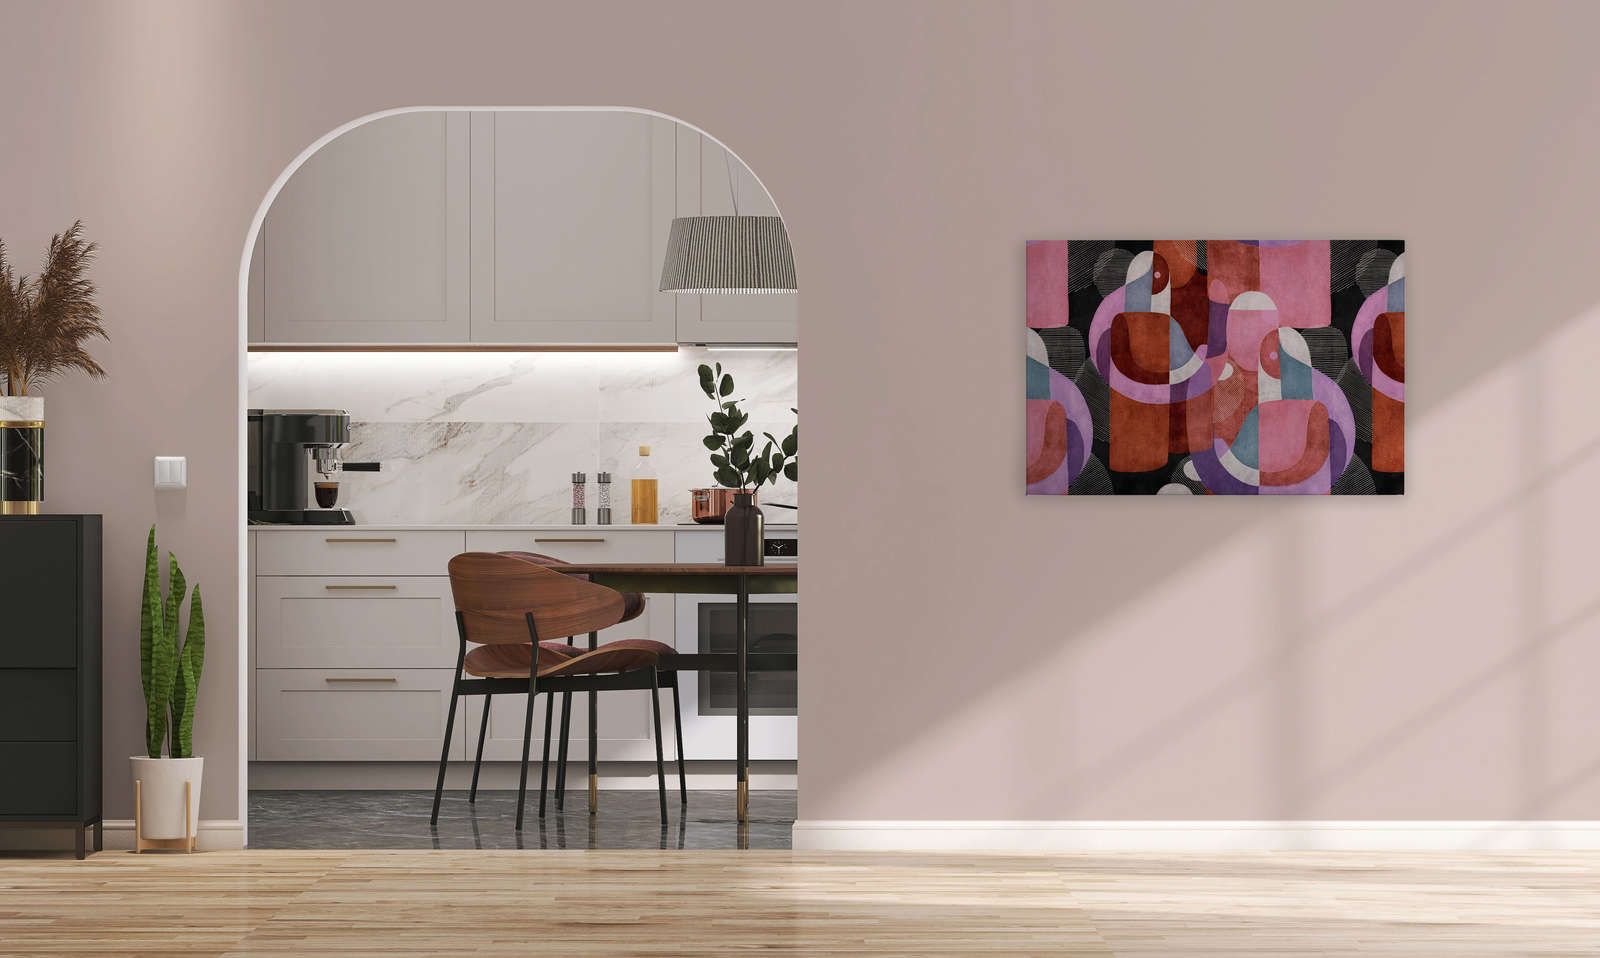             Meeting Place 2 - Canvas painting abstract ethno design in black & pink - 0,90 m x 0,60 m
        